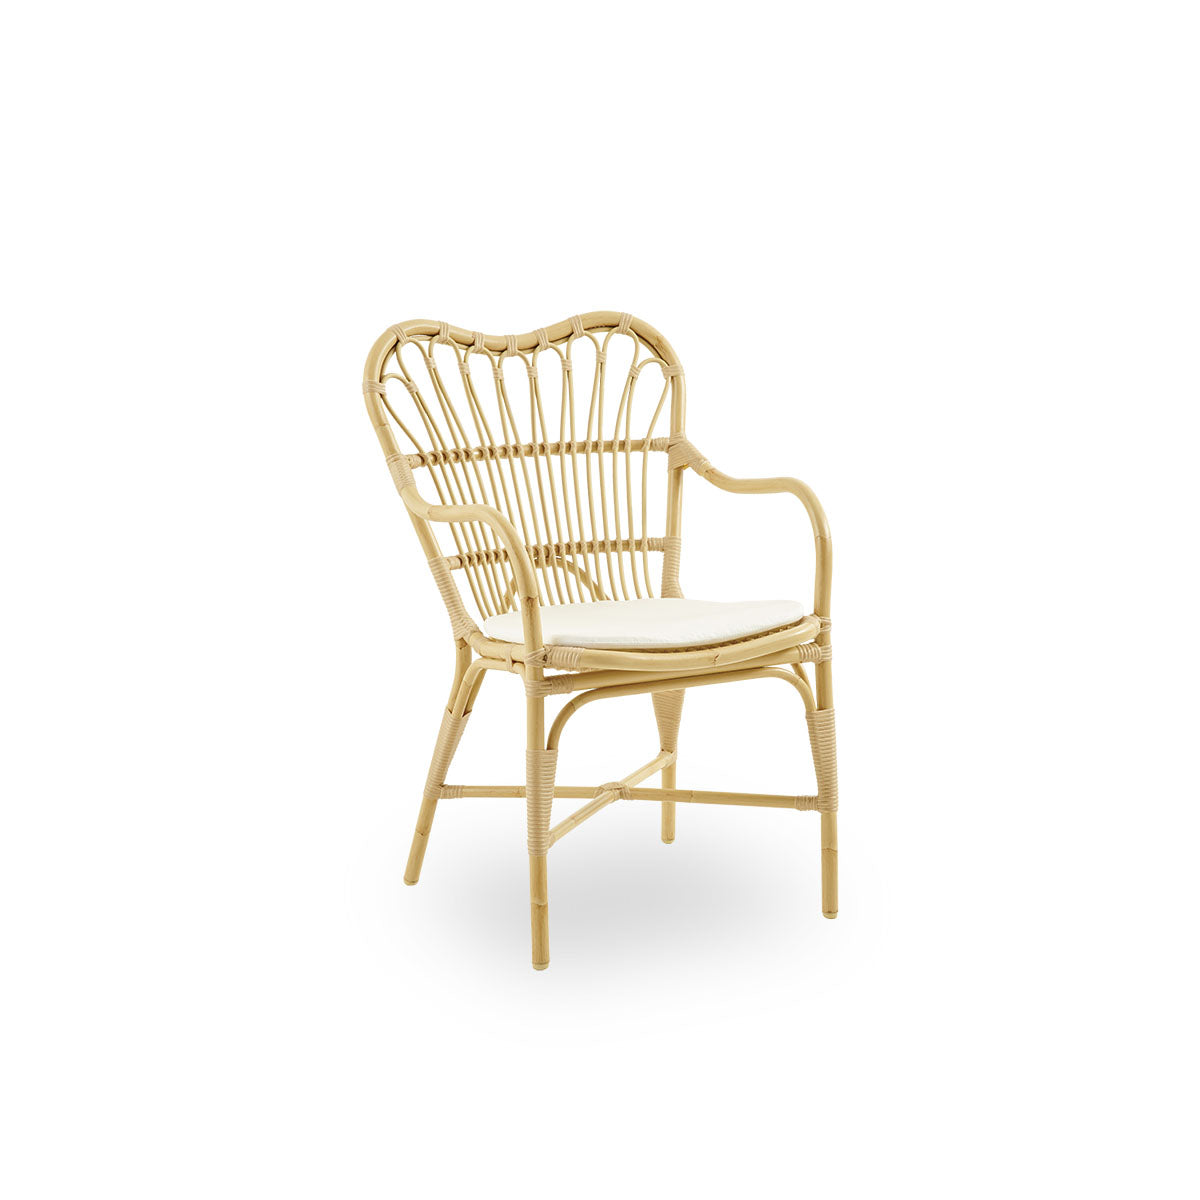 Margret Exterior Dining Chair | Seat cushion by Sika